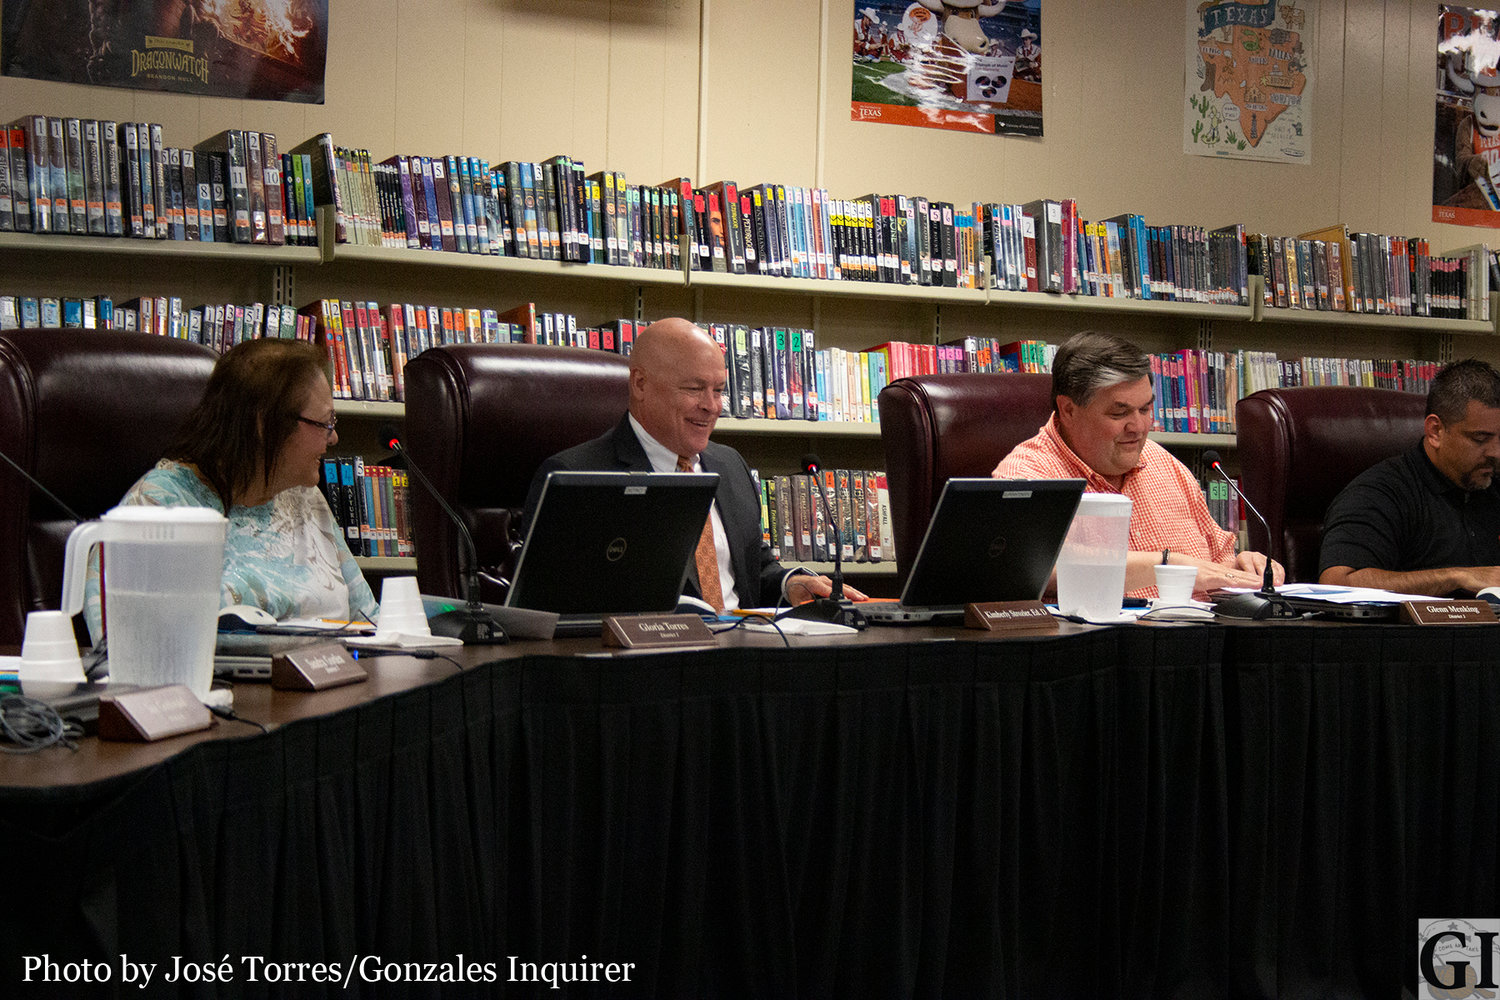 John Schumacher sat front and center for the first time on Monday after officially being hired as Gonzales ISD superintendent in the special meeting.